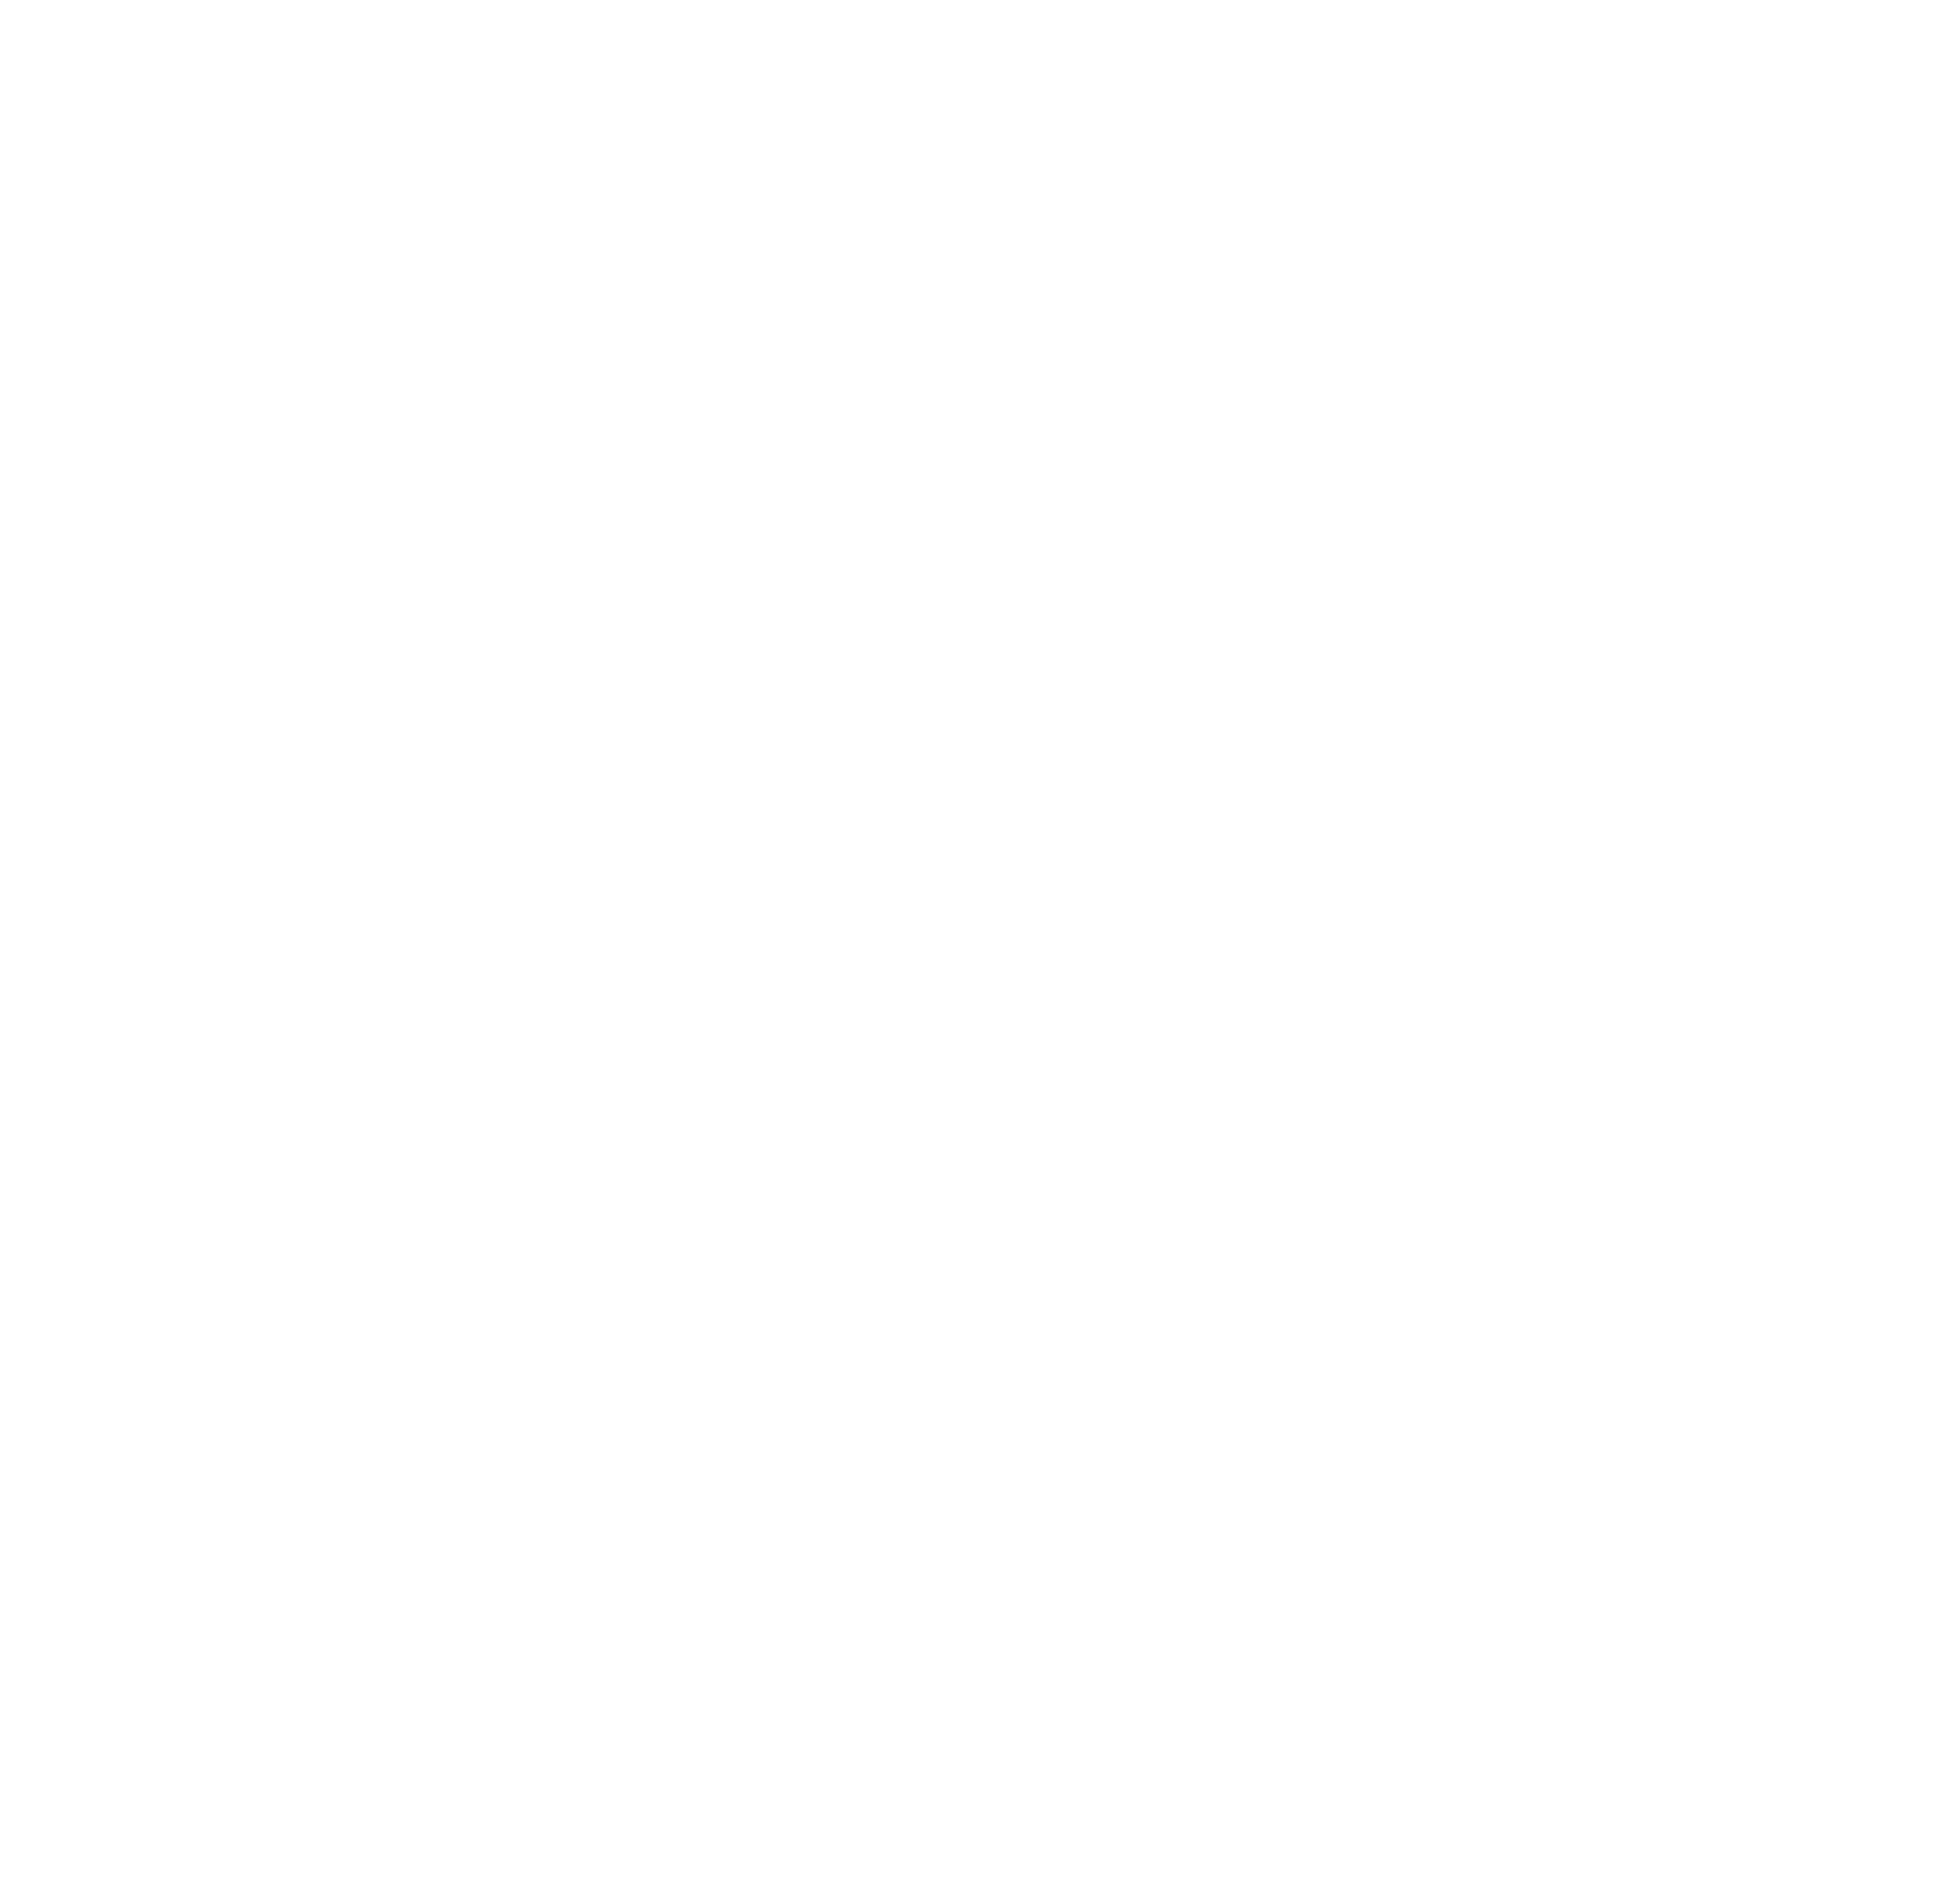 Inside Public Accounting Top 100 Firms 2022